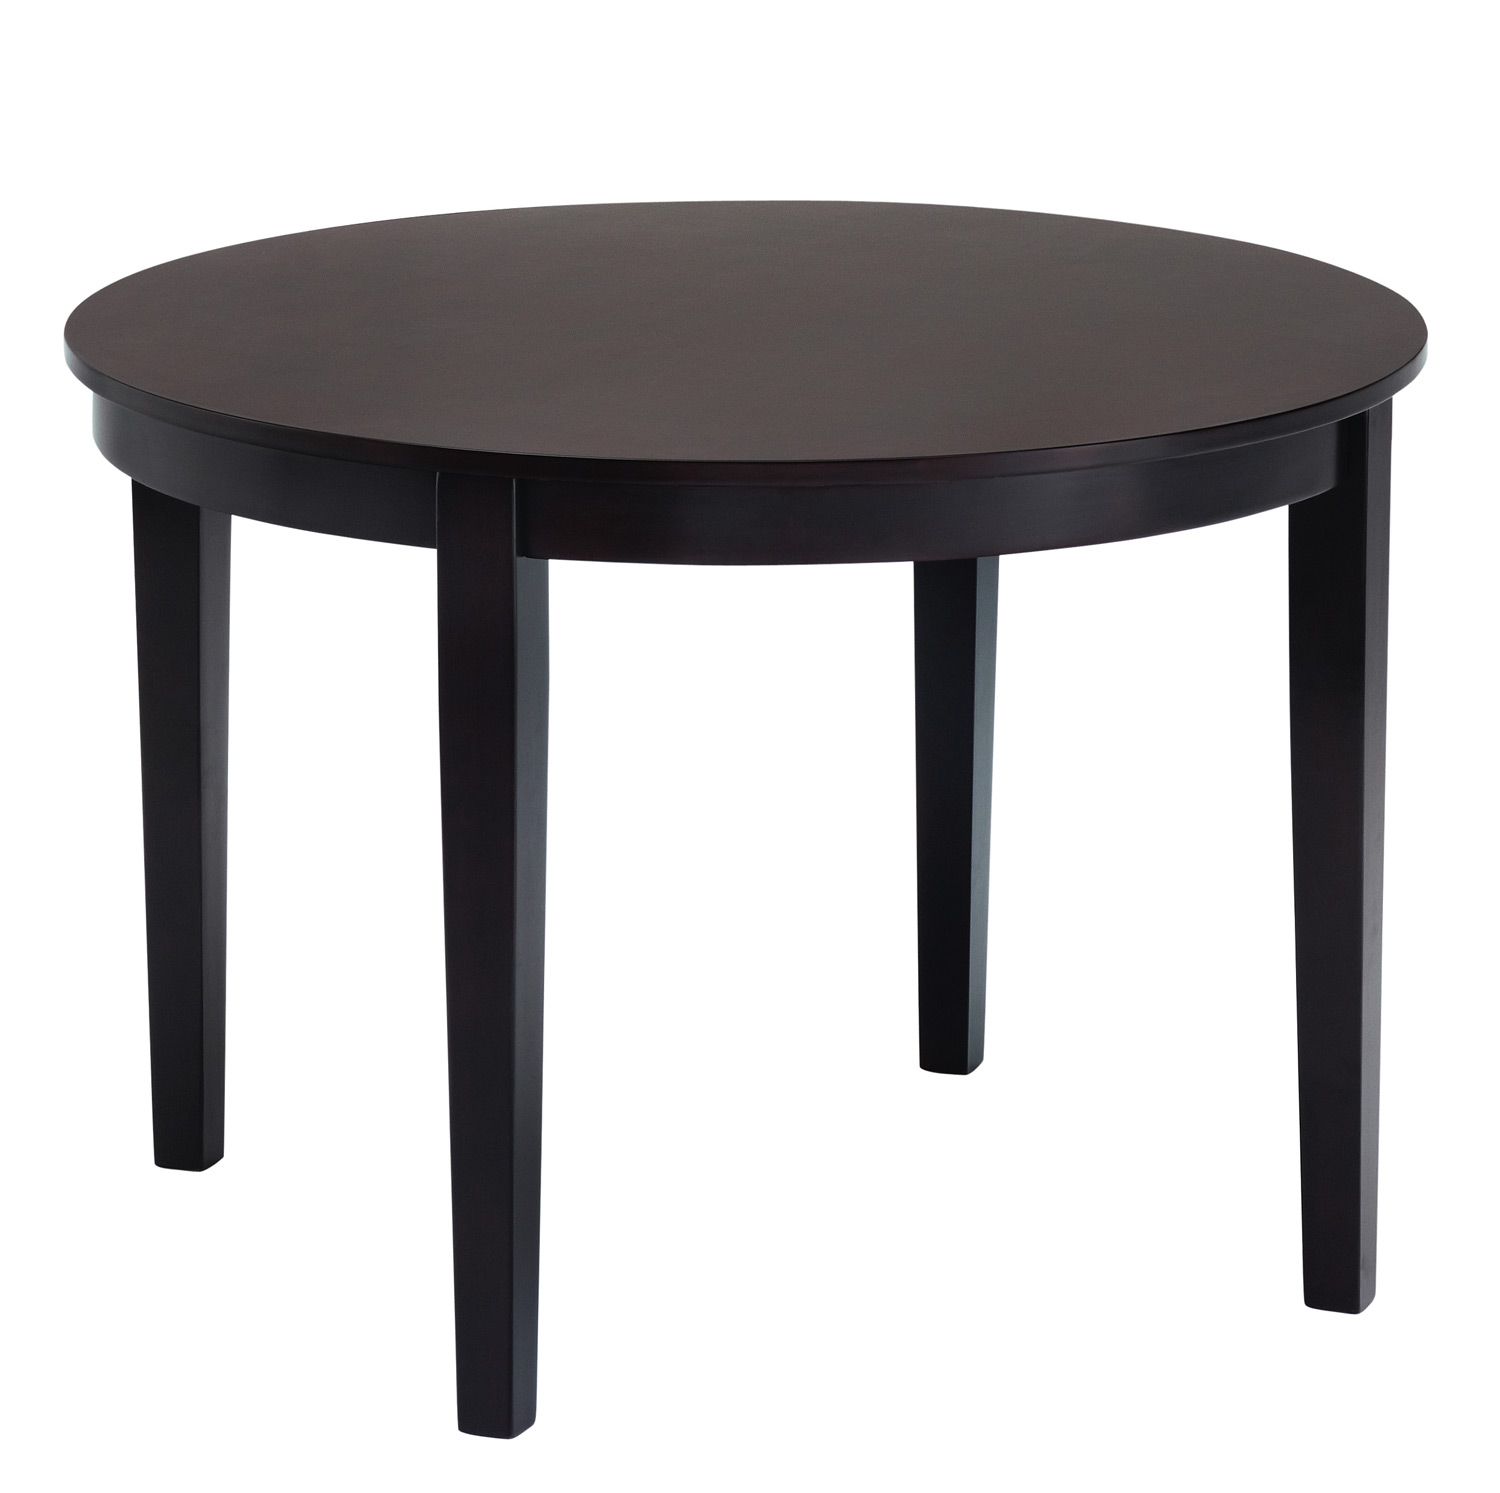 Abbyson Living Bahama Cappucino Wood Round Dining Table - Brown